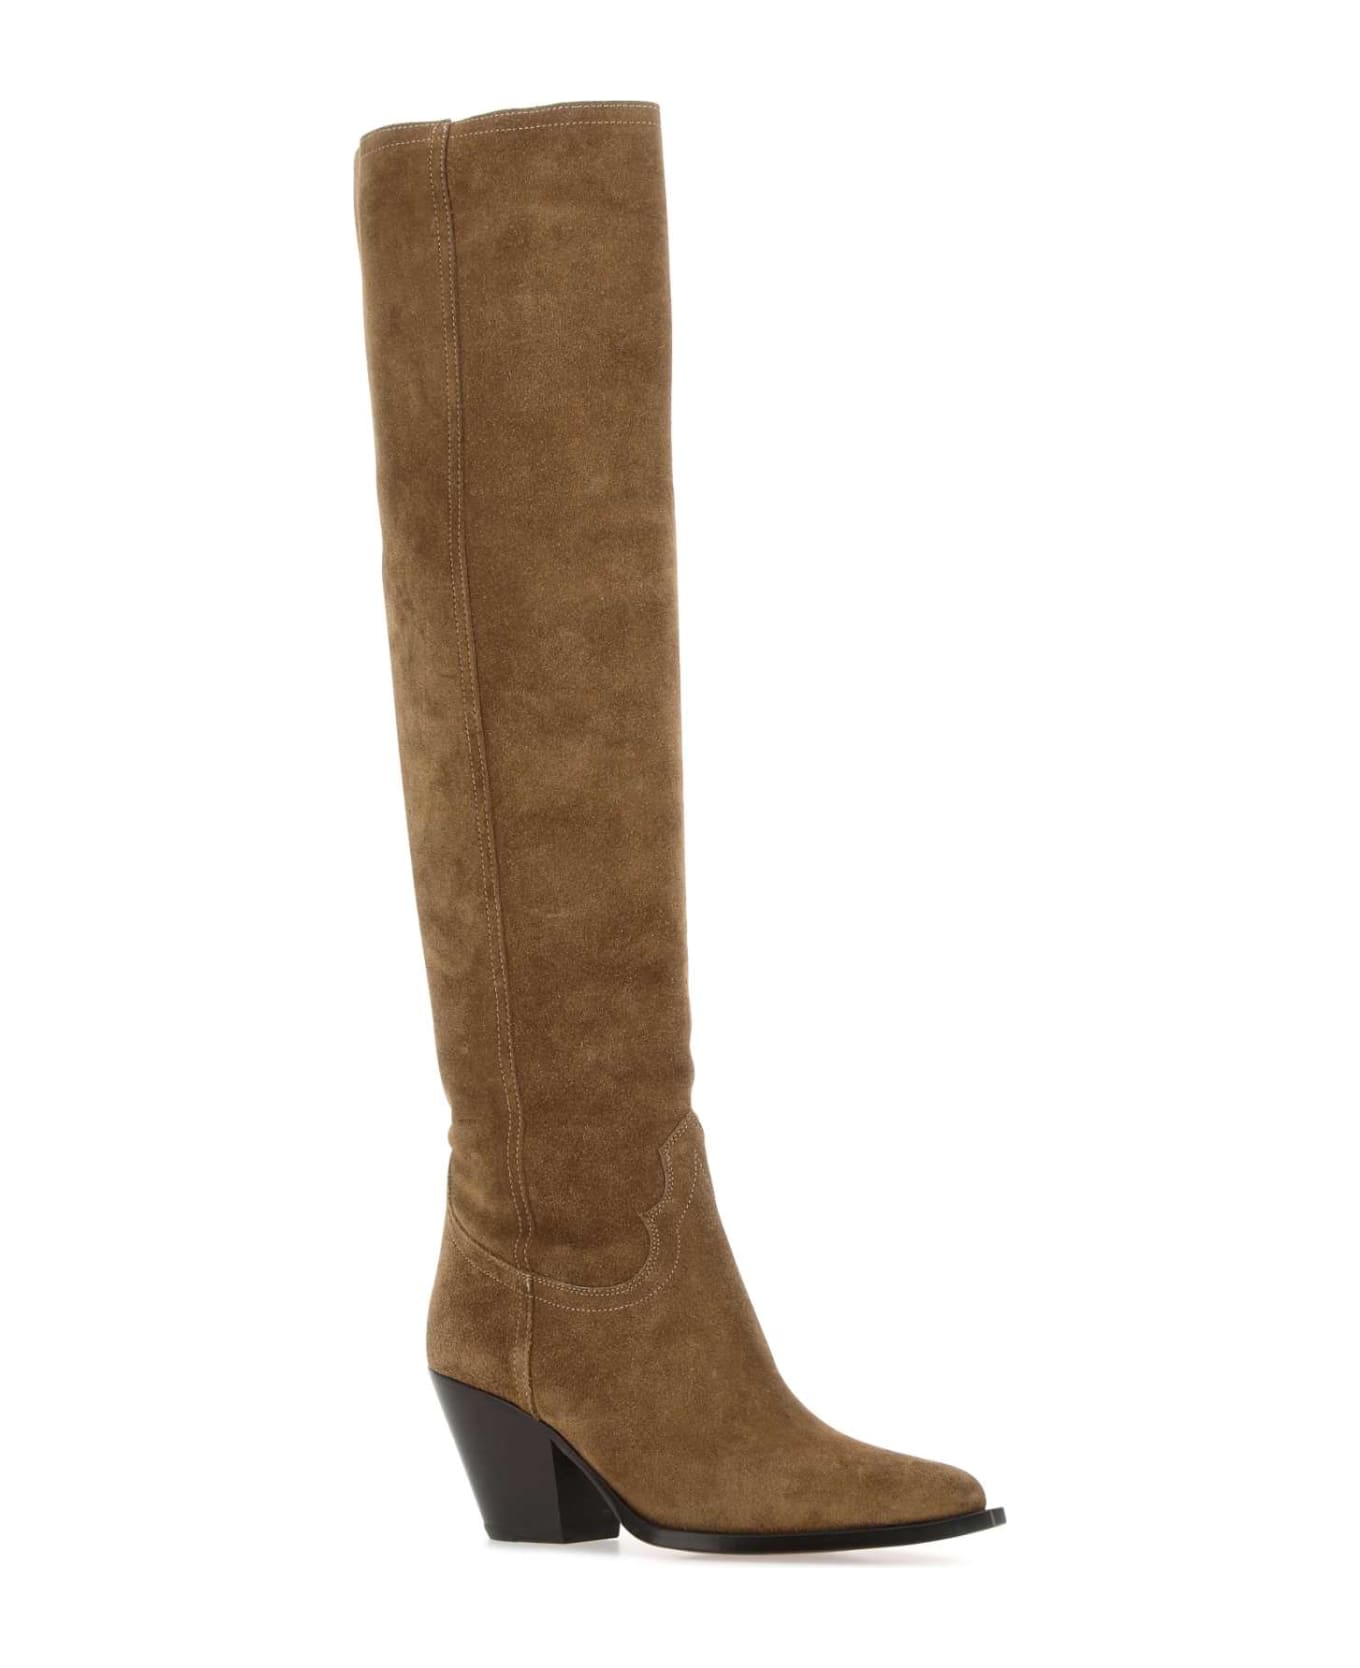 Sonora Biscuit Suede Acapulco Boots - Brown